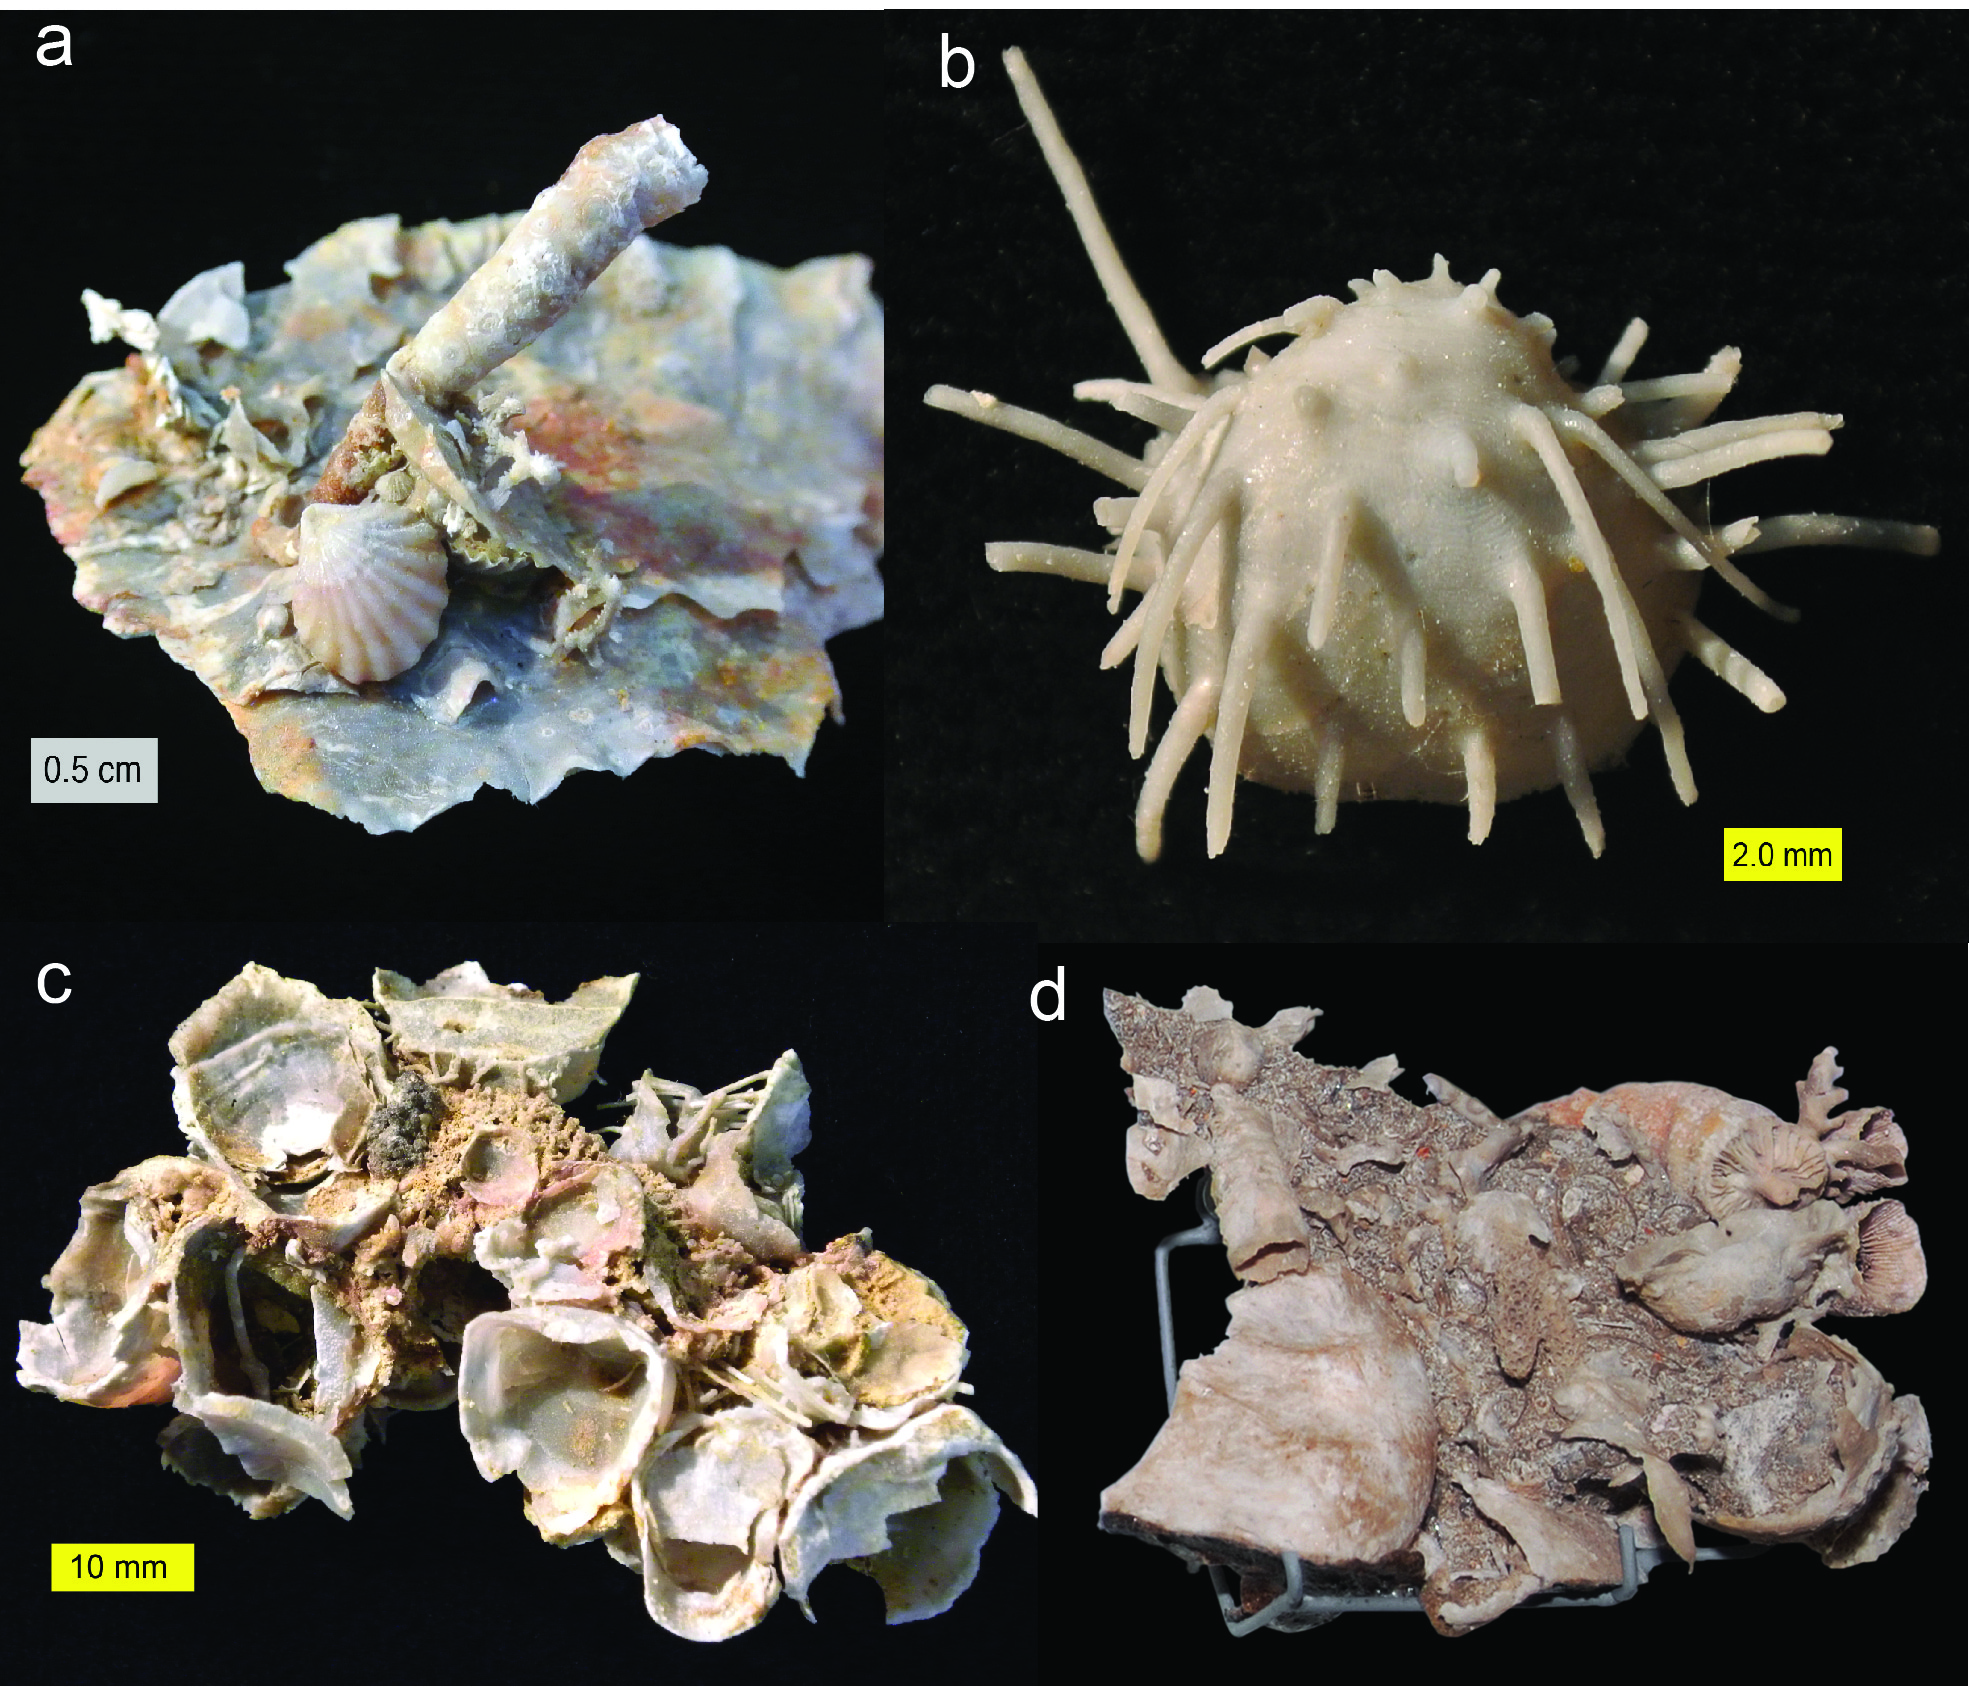 Fossils from the Capitan Formation of the Glass Mountains